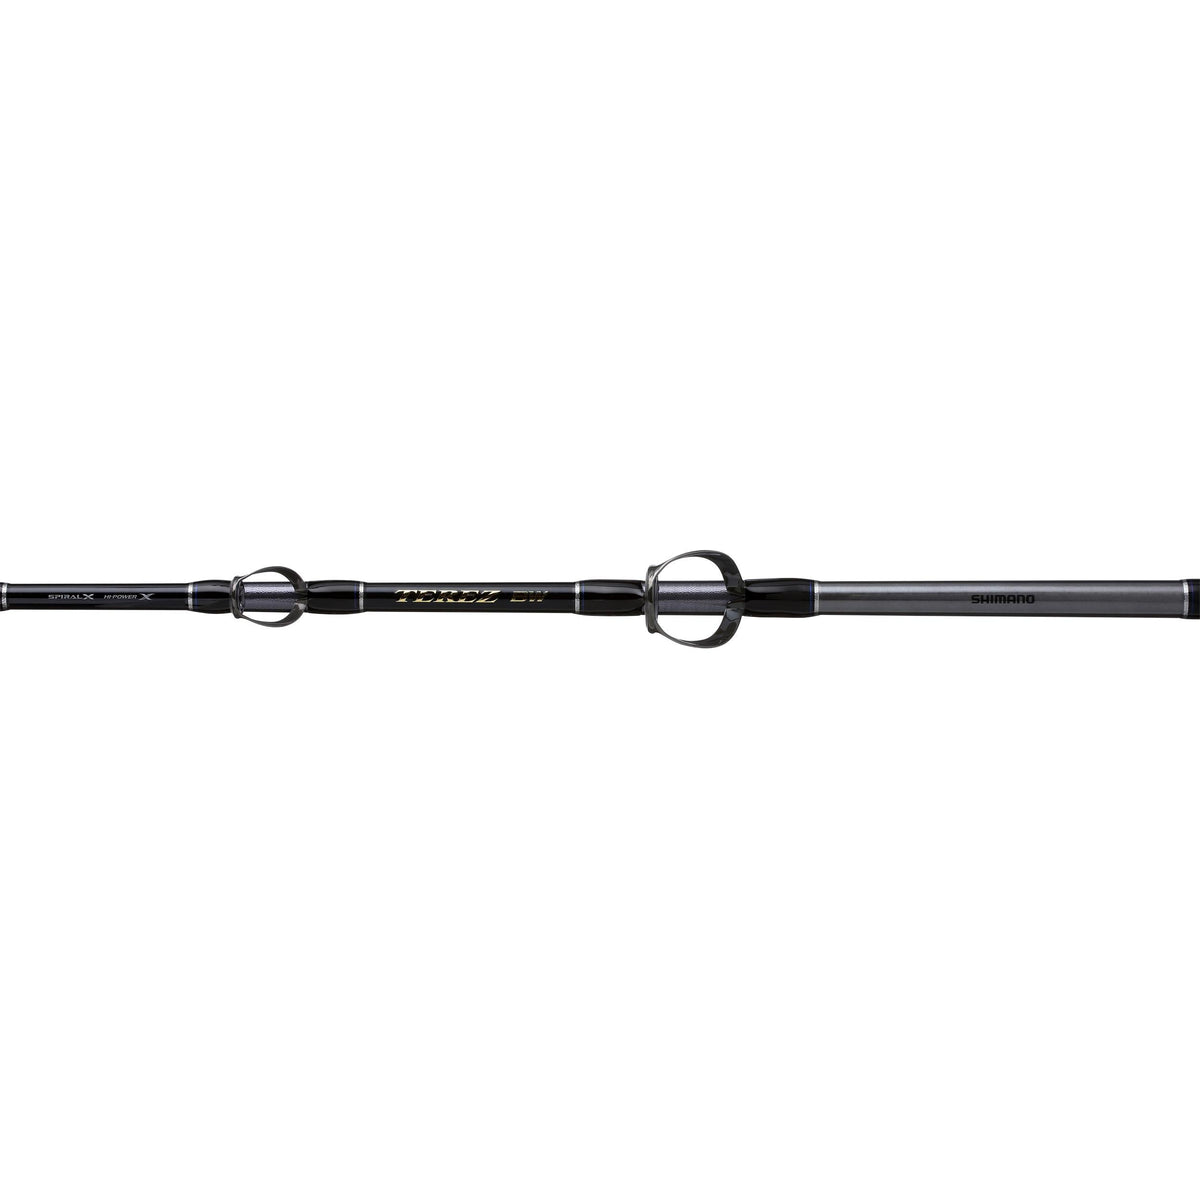 Get FREE ALPS Butt with Shimano Terez BW 7'0 M RG CST A Casting Rod from  SHIMANO - CHAOS Fishing